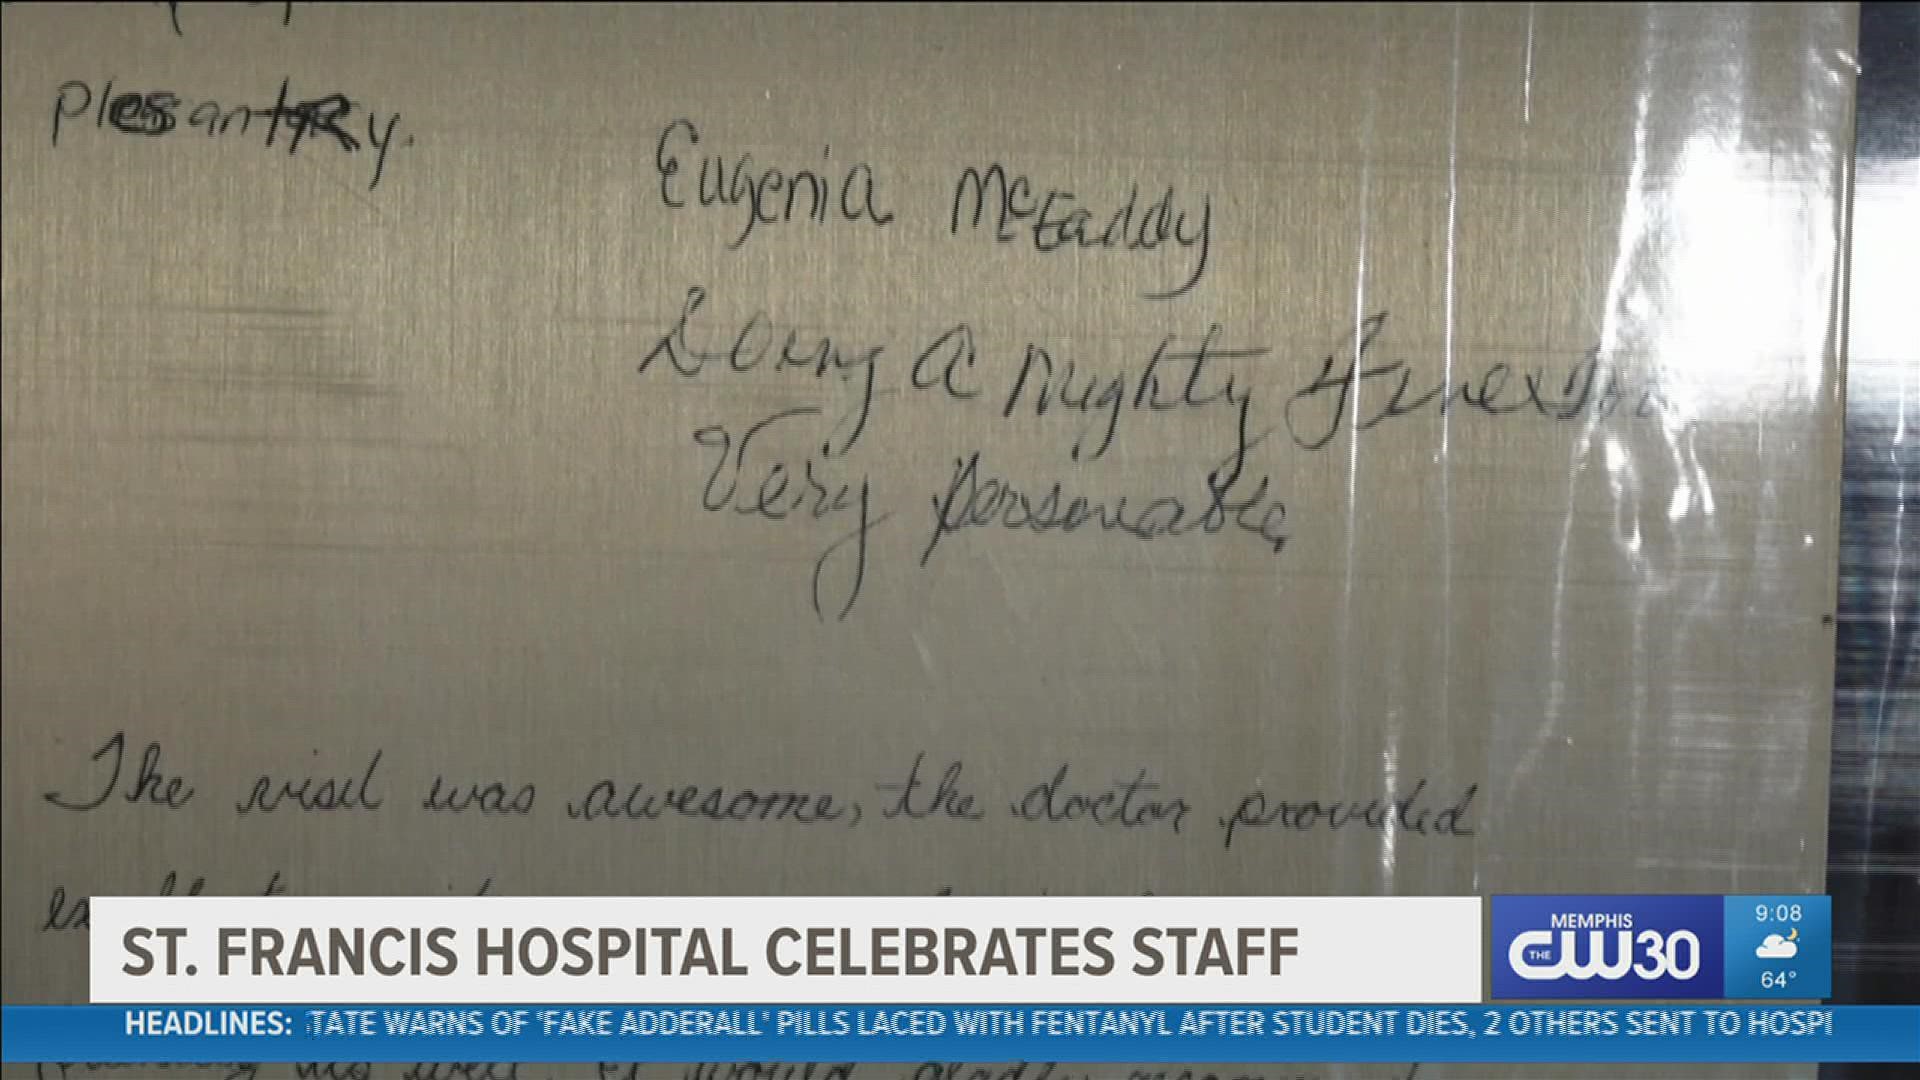 St. Francis Hospital dedicated its staff with special notes from former patients.